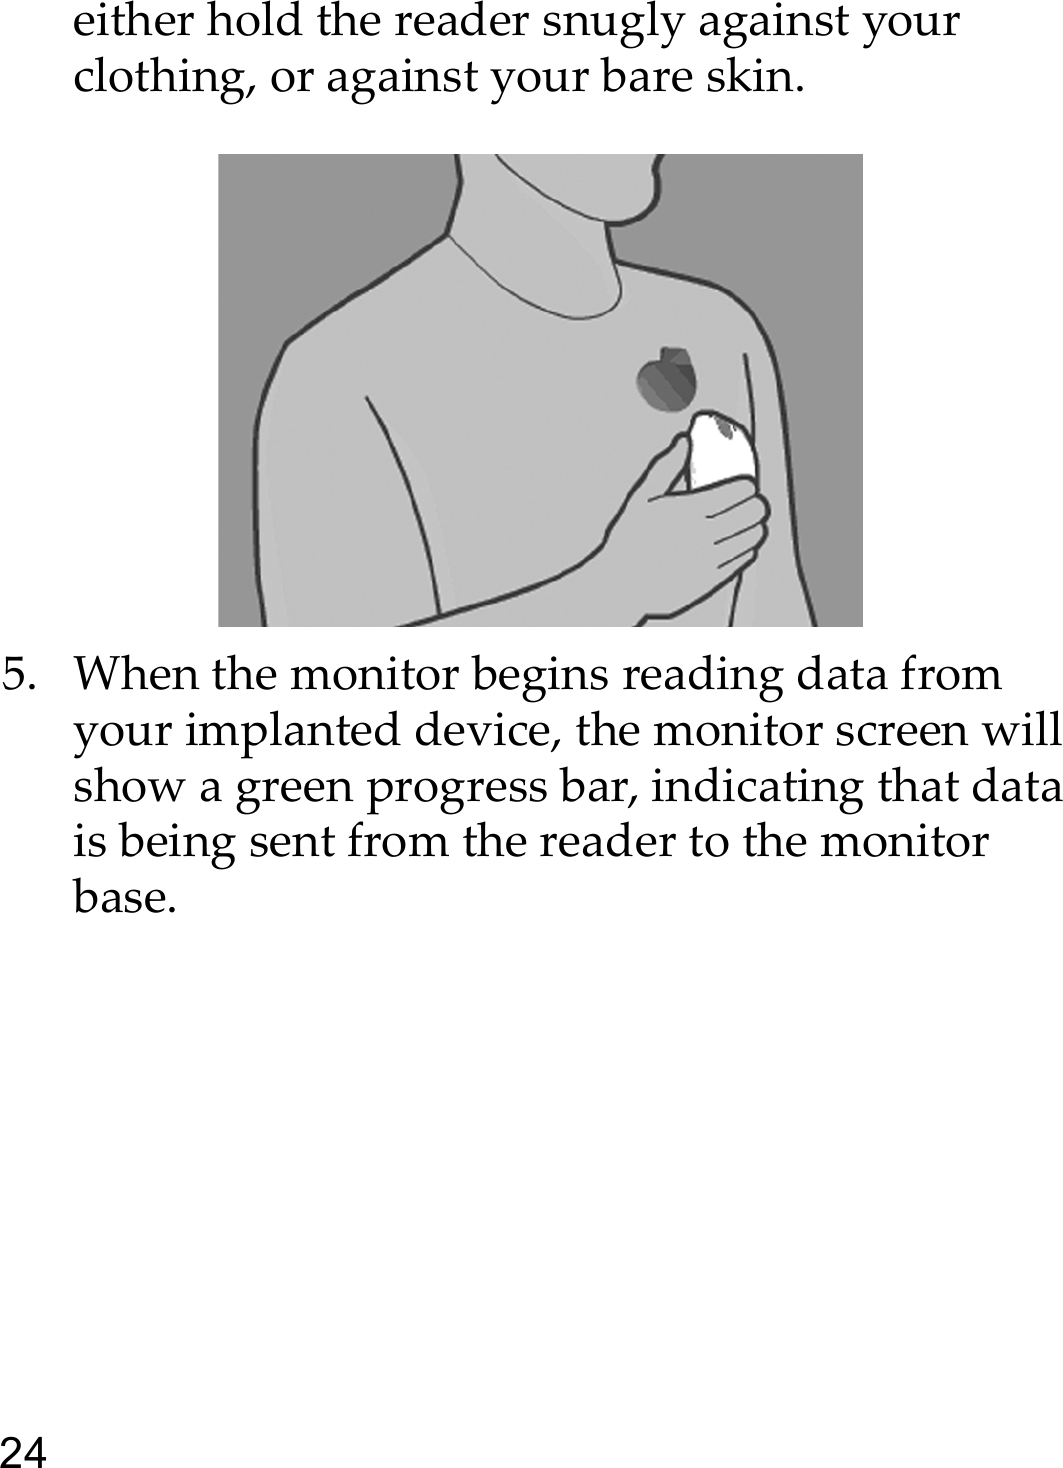 24either hold the reader snugly against your clothing, or against your bare skin.5. When the monitor begins reading data from your implanted device, the monitor screen will show a green progress bar, indicating that data is being sent from the reader to the monitor base. 